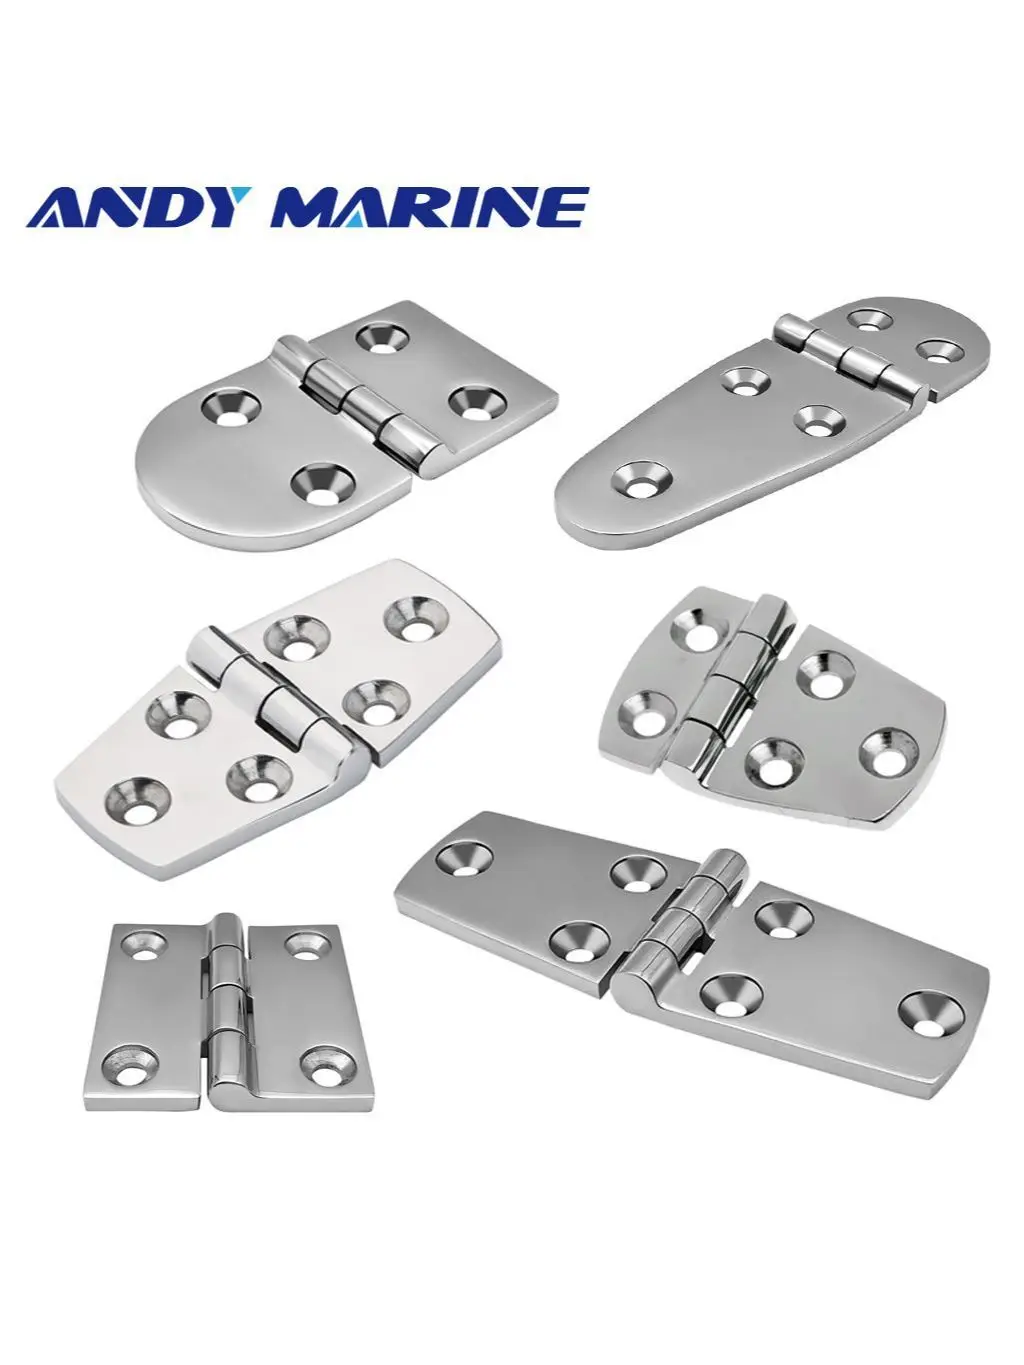 Andymarine Heavy Stainless Steel Casting Hinge Flat Hinge Cabinet Doors For Windows Hinge Wooden Box Hinge Thickness toaiot magnetic base 2mm thickness magnetic stickers 102mm 124mm 165mm 410mm 510mm size for 3d printer steel sheet